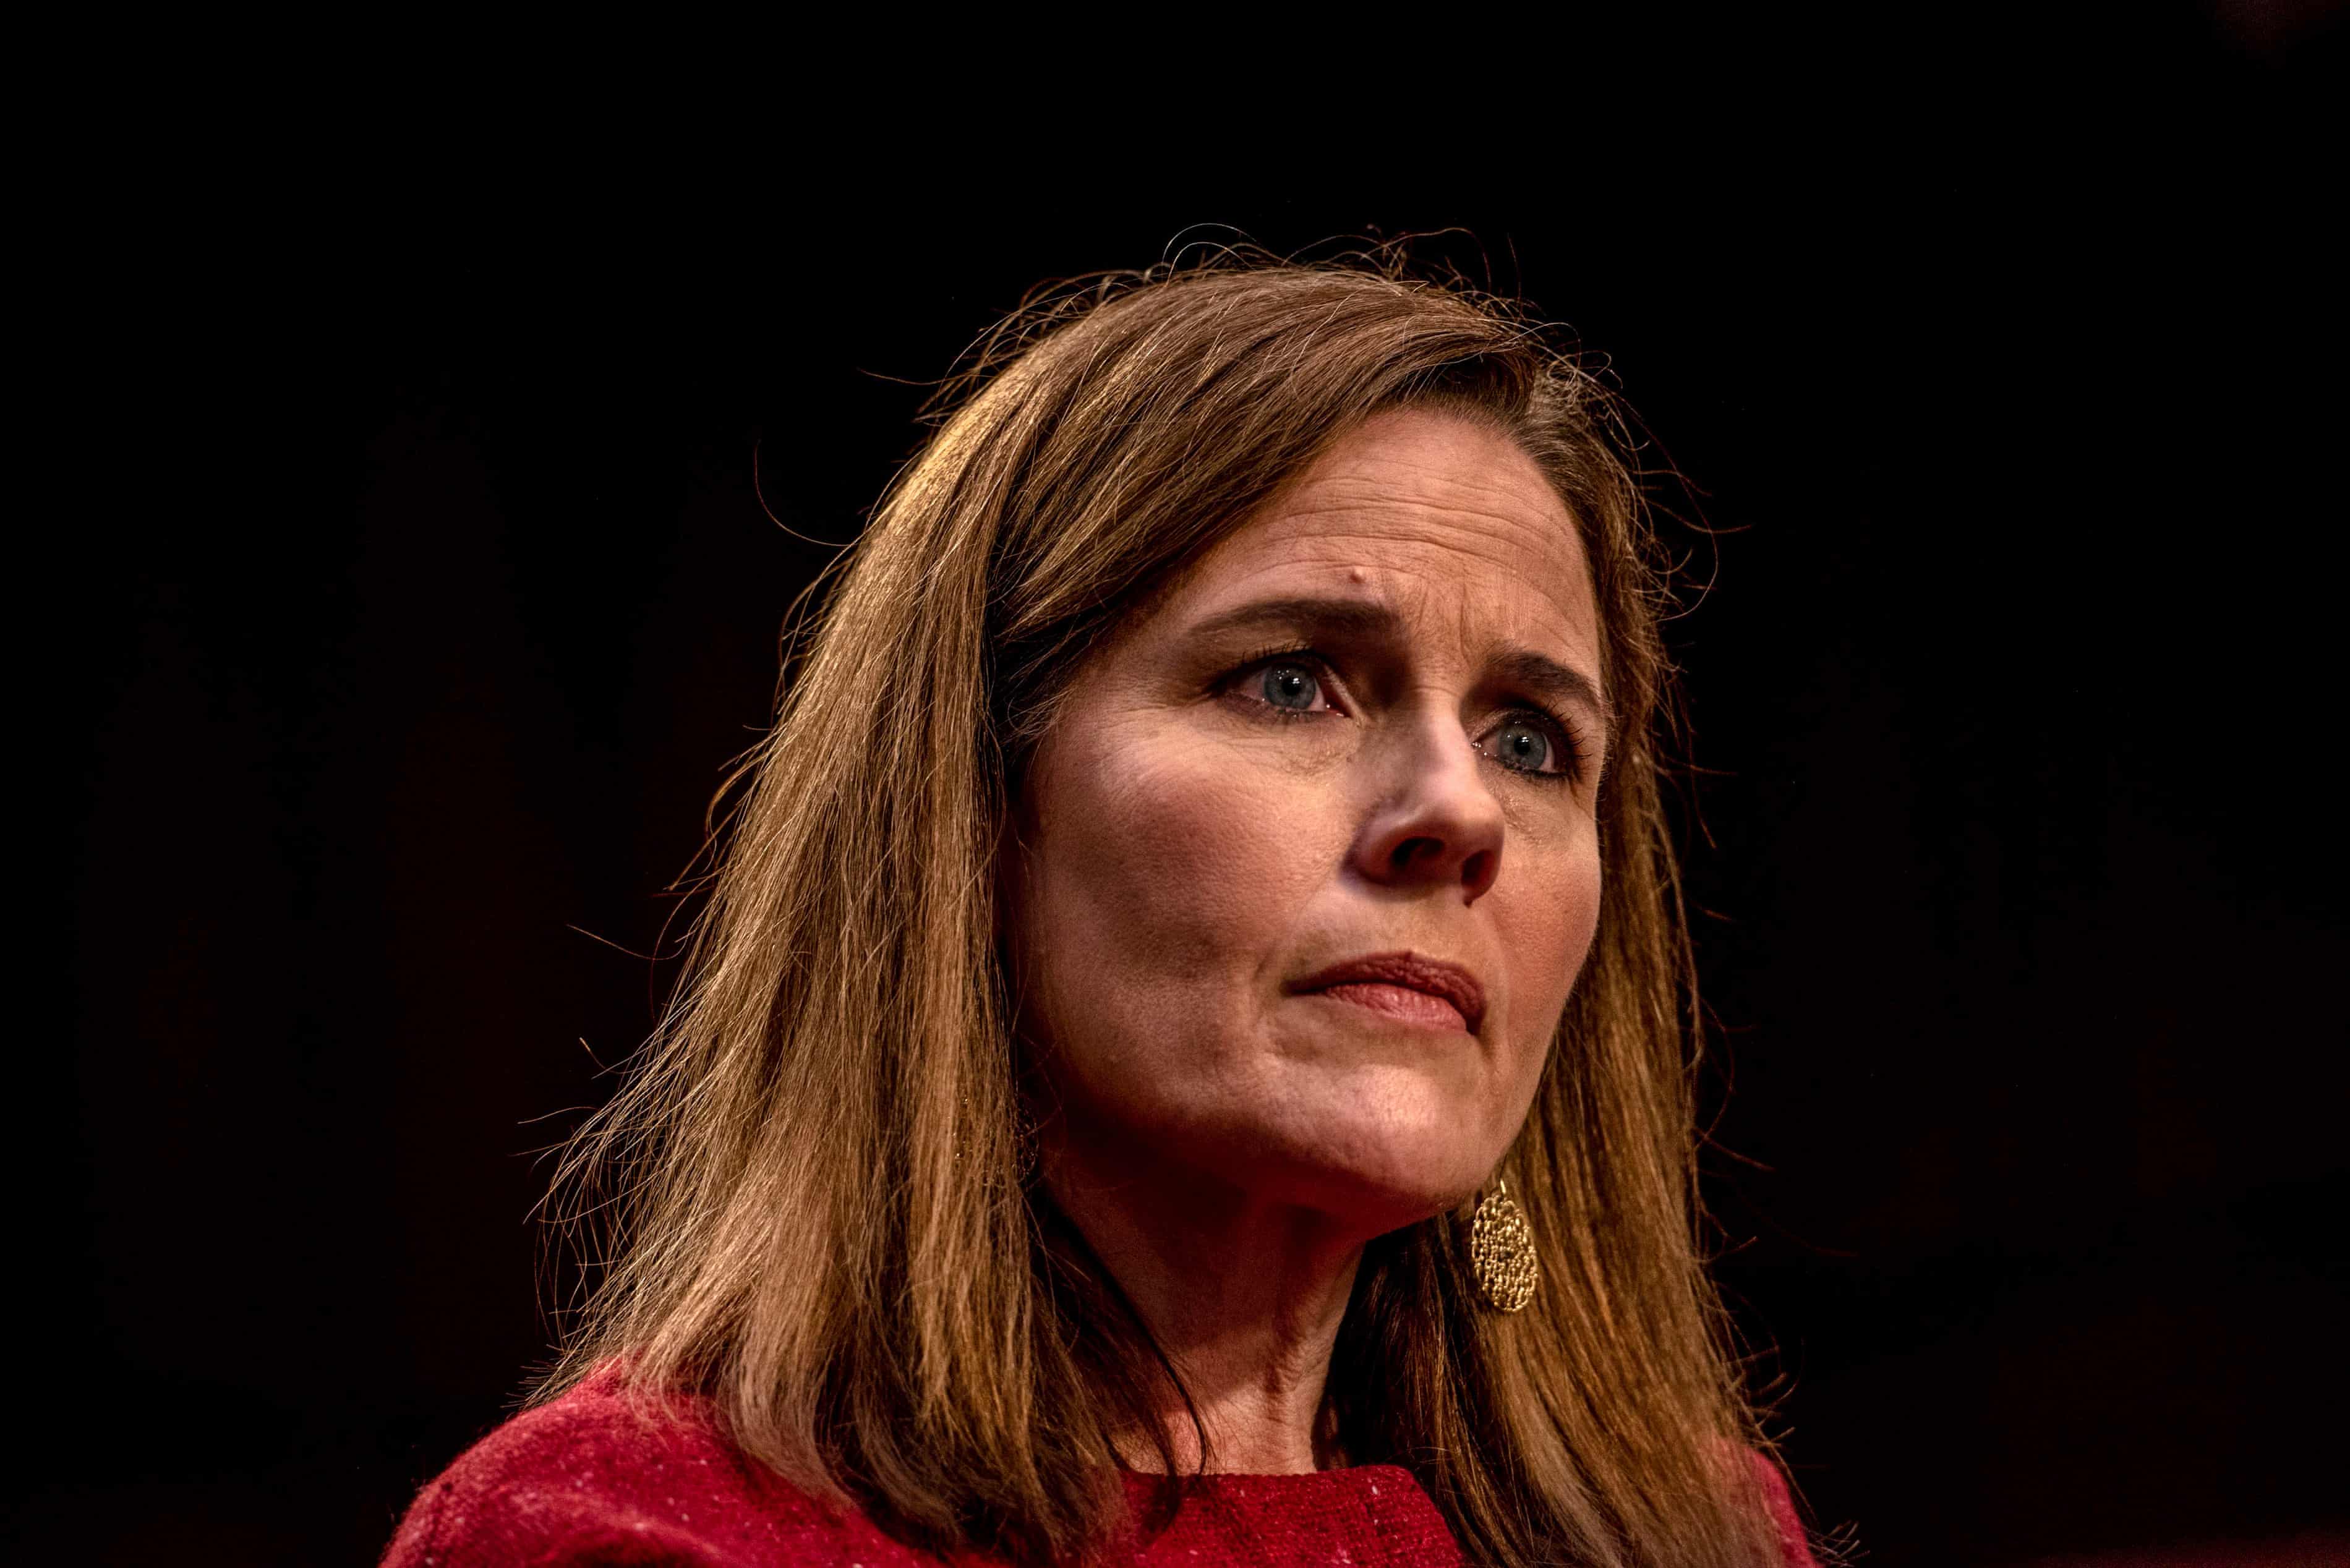 New role for Amy Coney Barrett’s father inside Christian sect sparks controversy (theguardian.com)